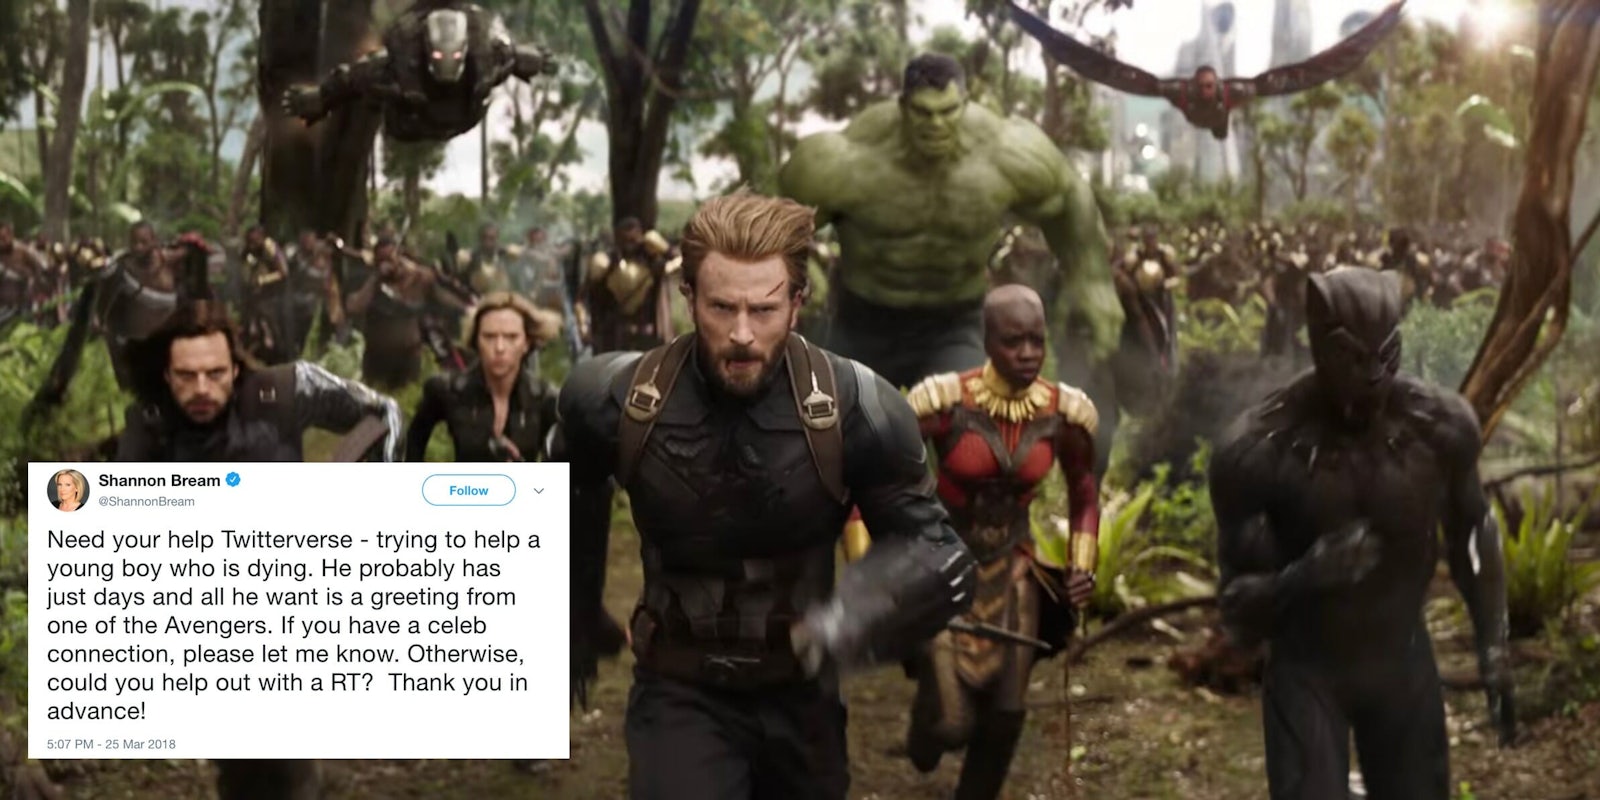 Avengers Unite on Twitter to Help Out Terminally Ill Boy